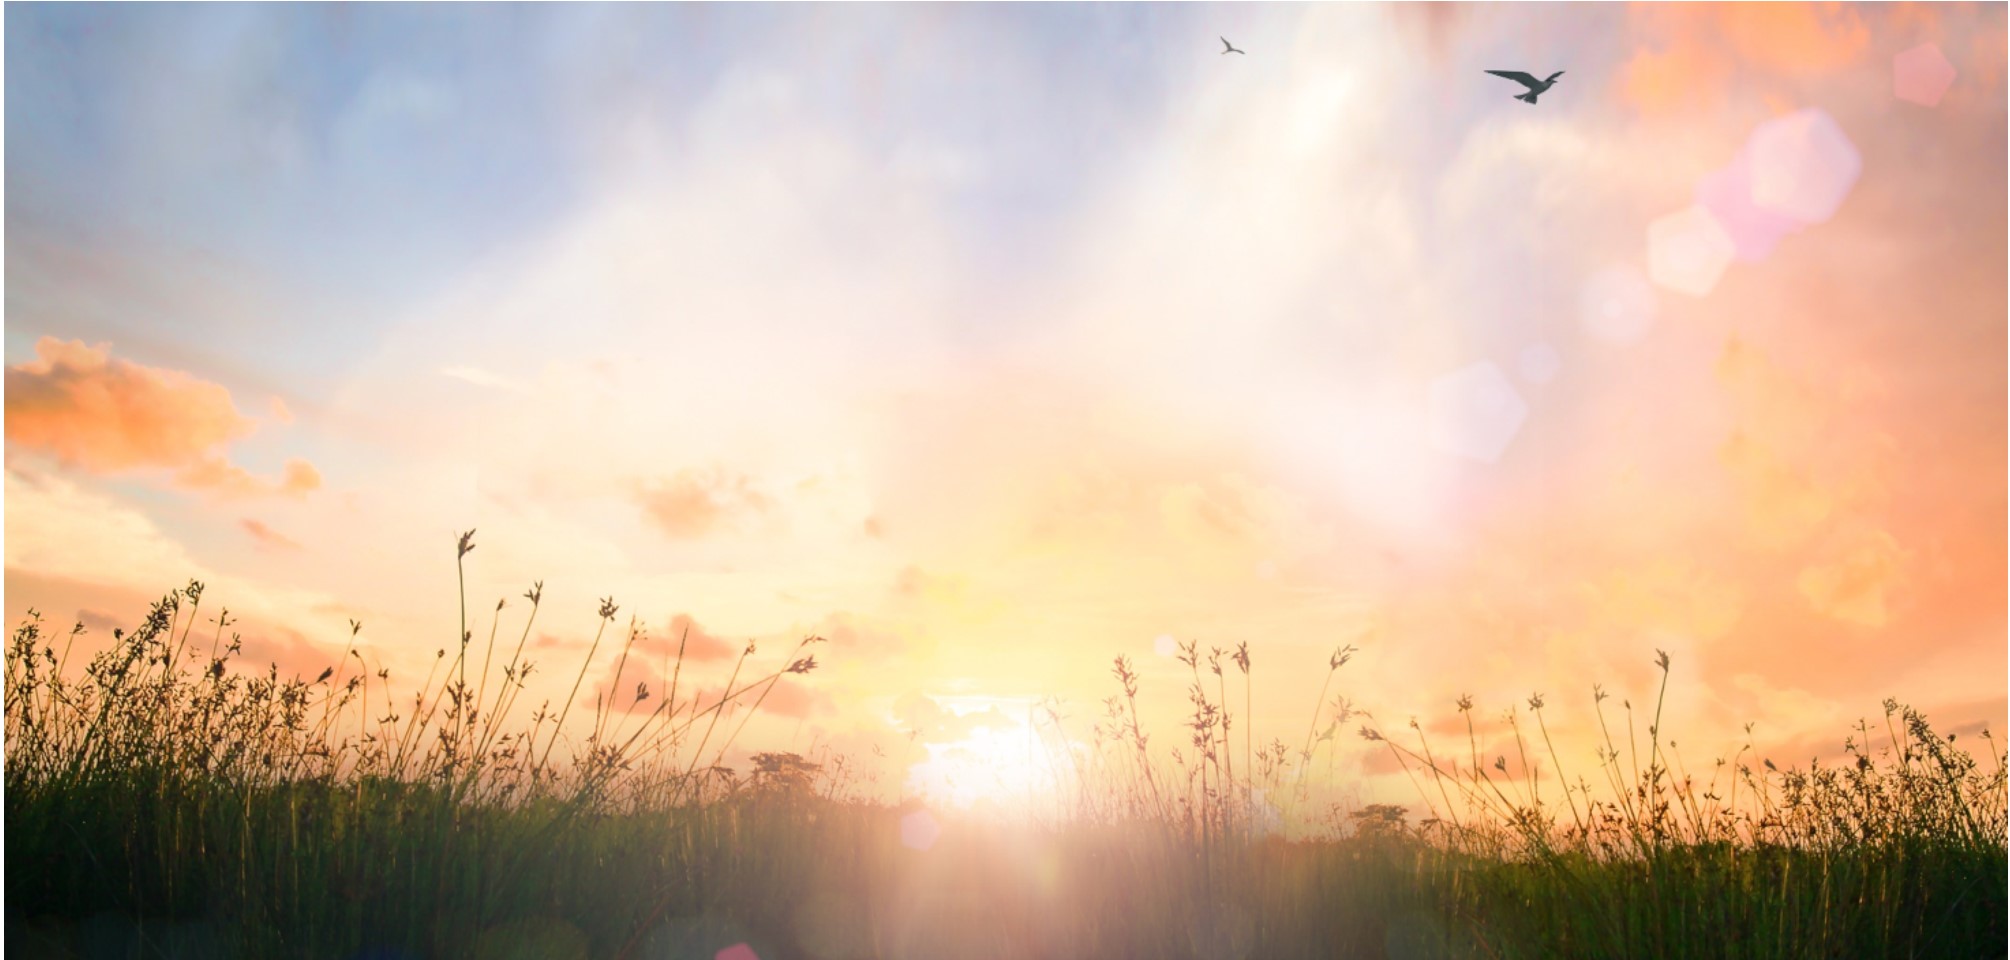 this is a photo of what appears to be a sunset, with the sun right at the horizon, casting beautiful, bright light into the sky. In the foreground is a field, with higher stalks popping up and a bird in the air above